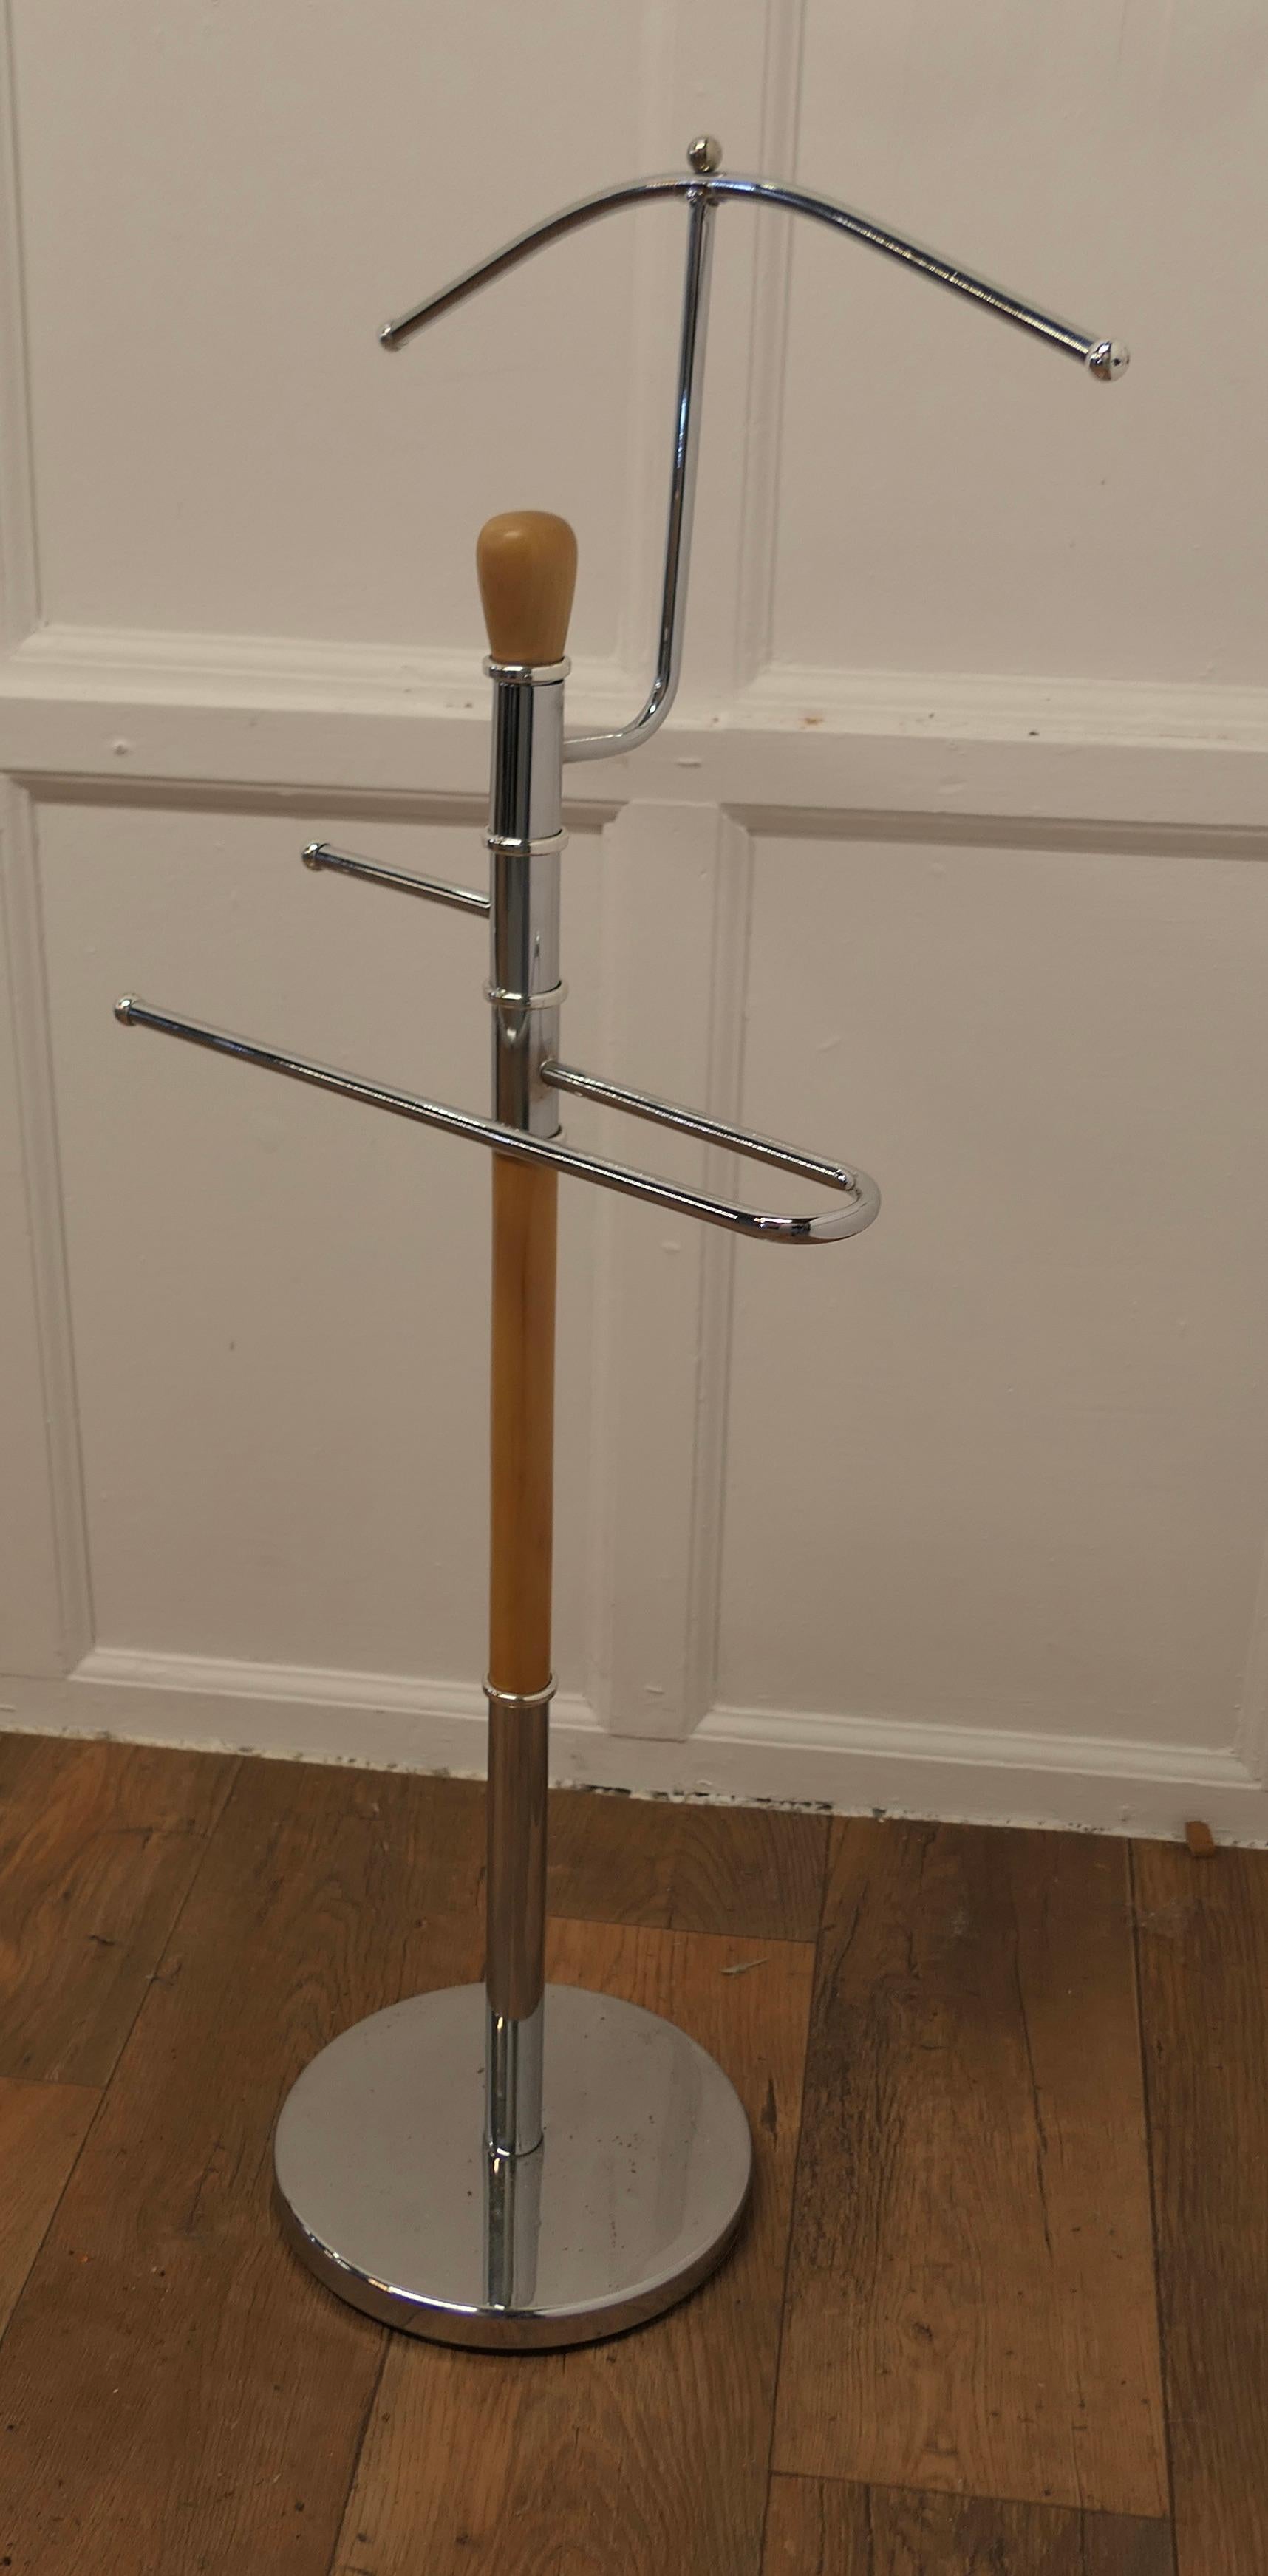 Midcentury Gentleman’s Floor Standing Valet Suit Hanger


A very useful piece, the Valet or clothes stand has a modern look in beech and chrome with a coat hanger an trouser rail
This delightful stand will accommodate jacket and trousers, but it